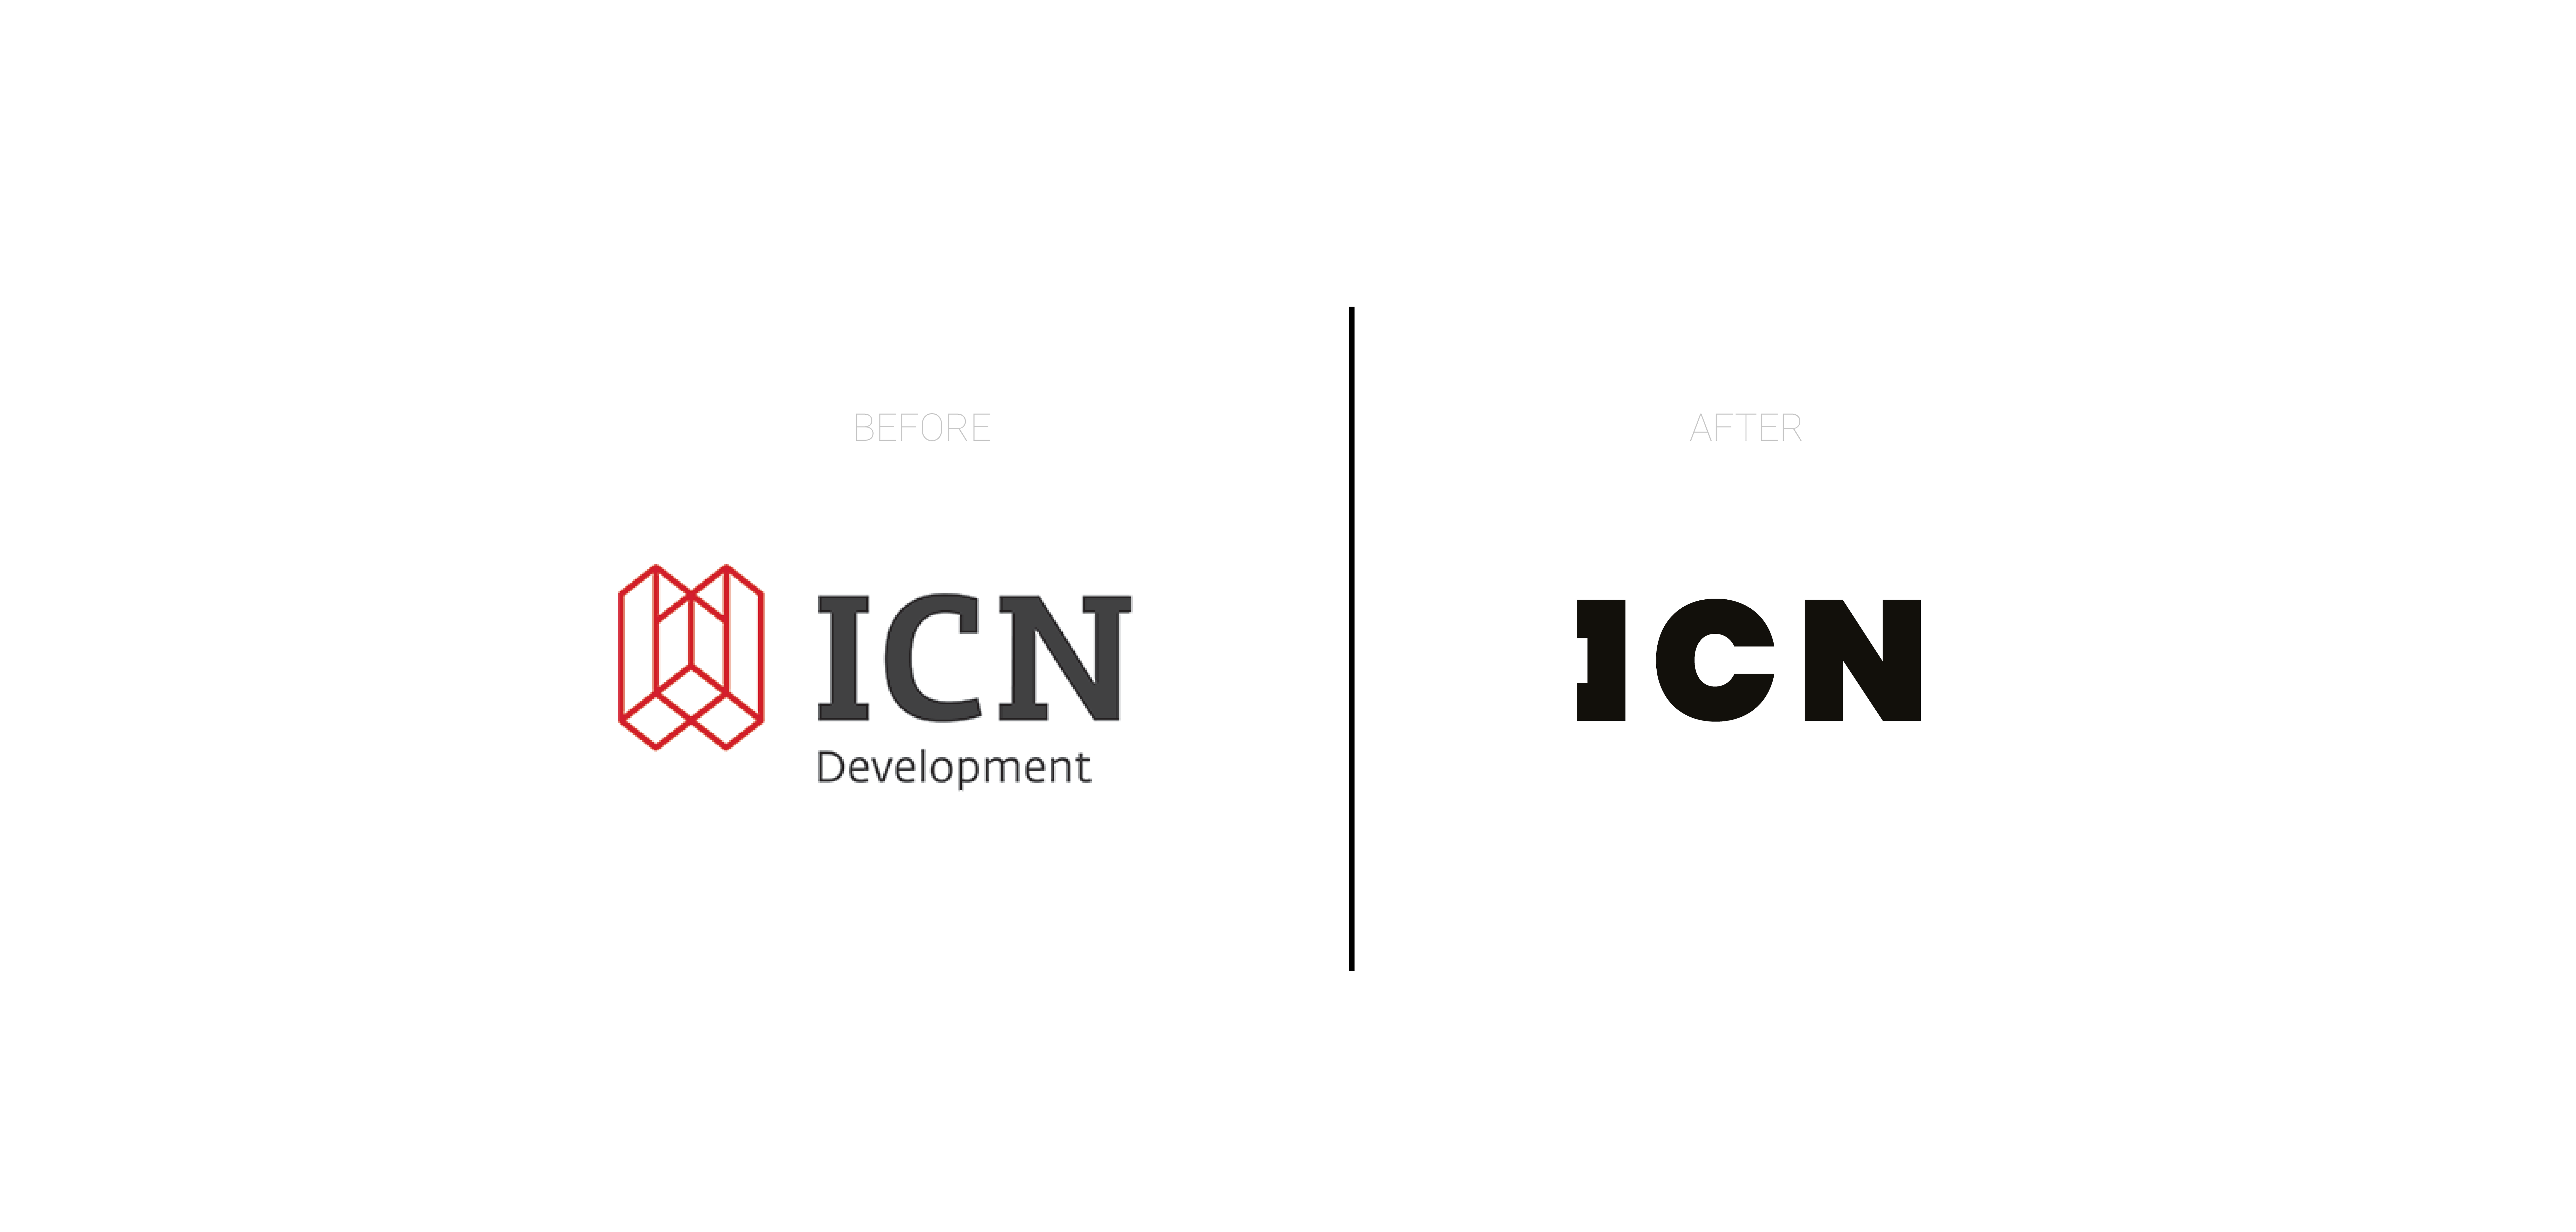 ICN-logo-before-after-enigma